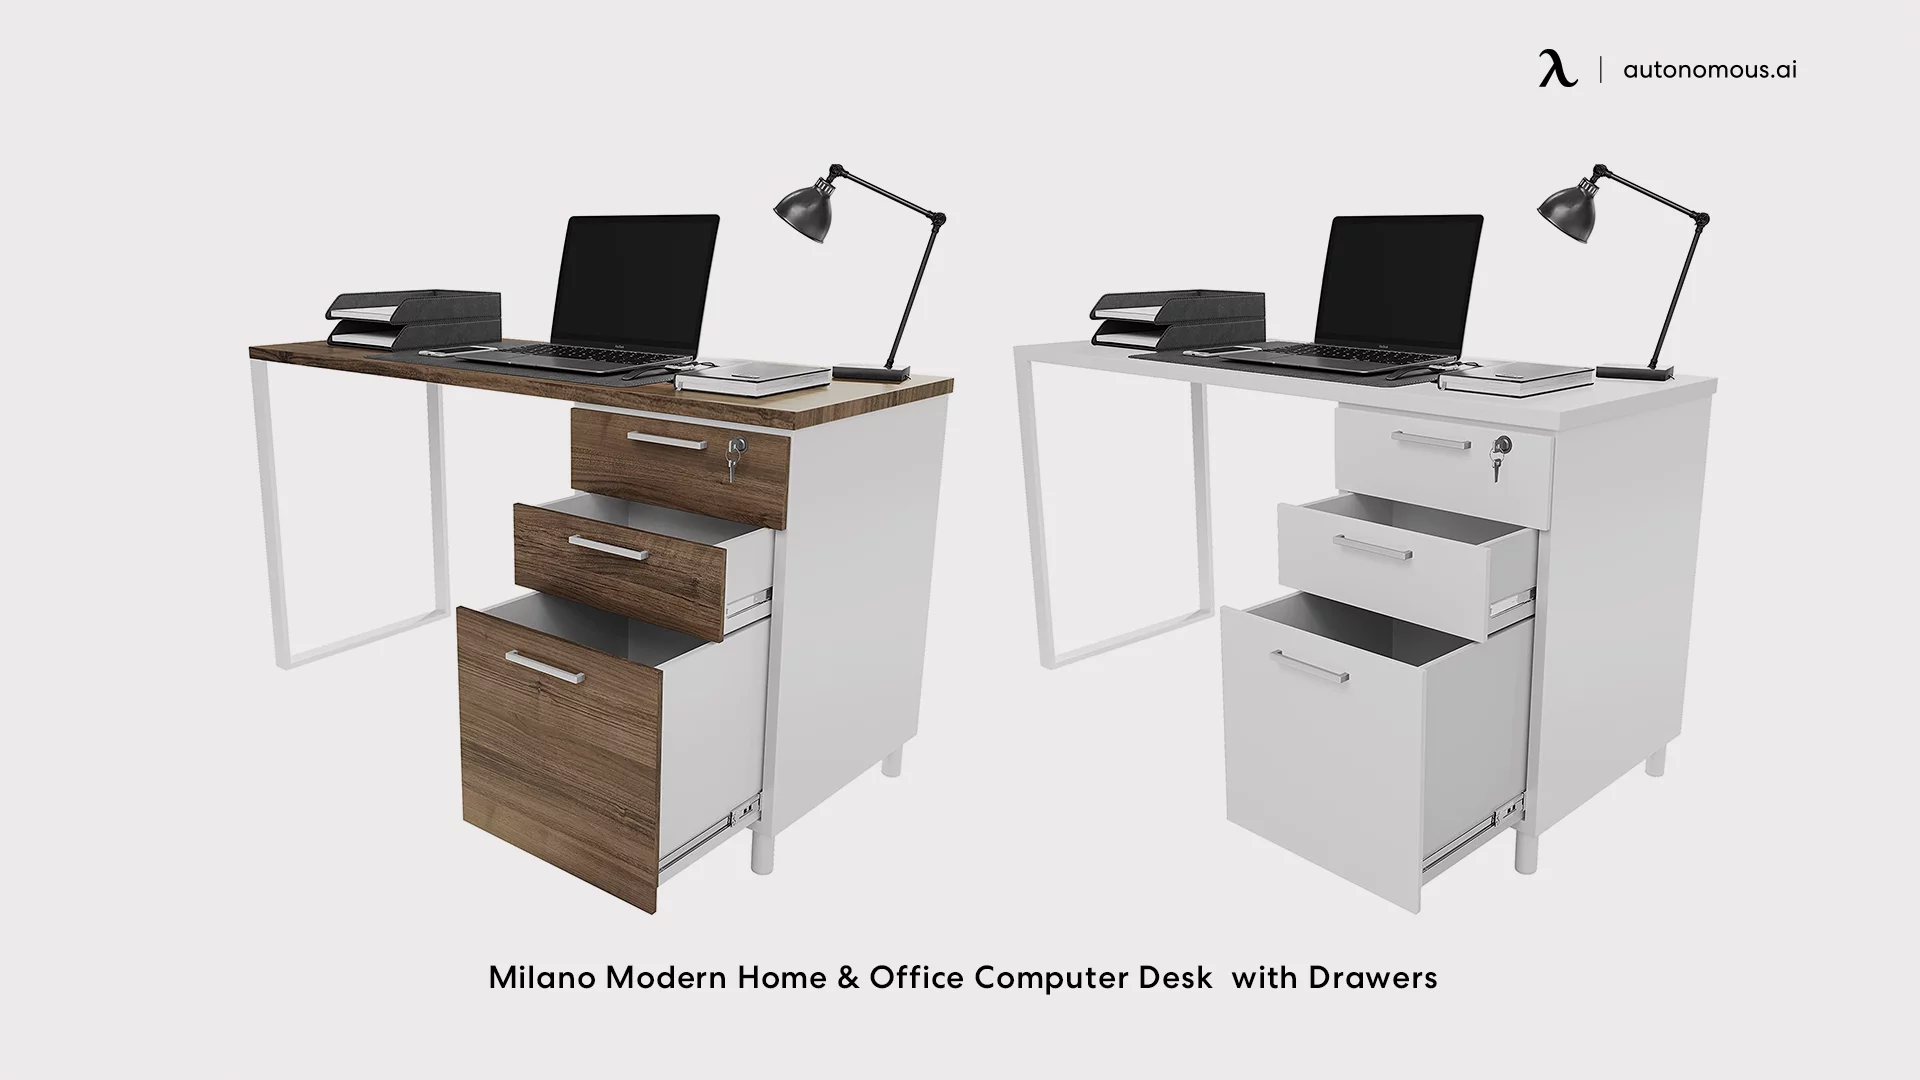 Milano Modern Home & Office Computer Desk  with Drawers